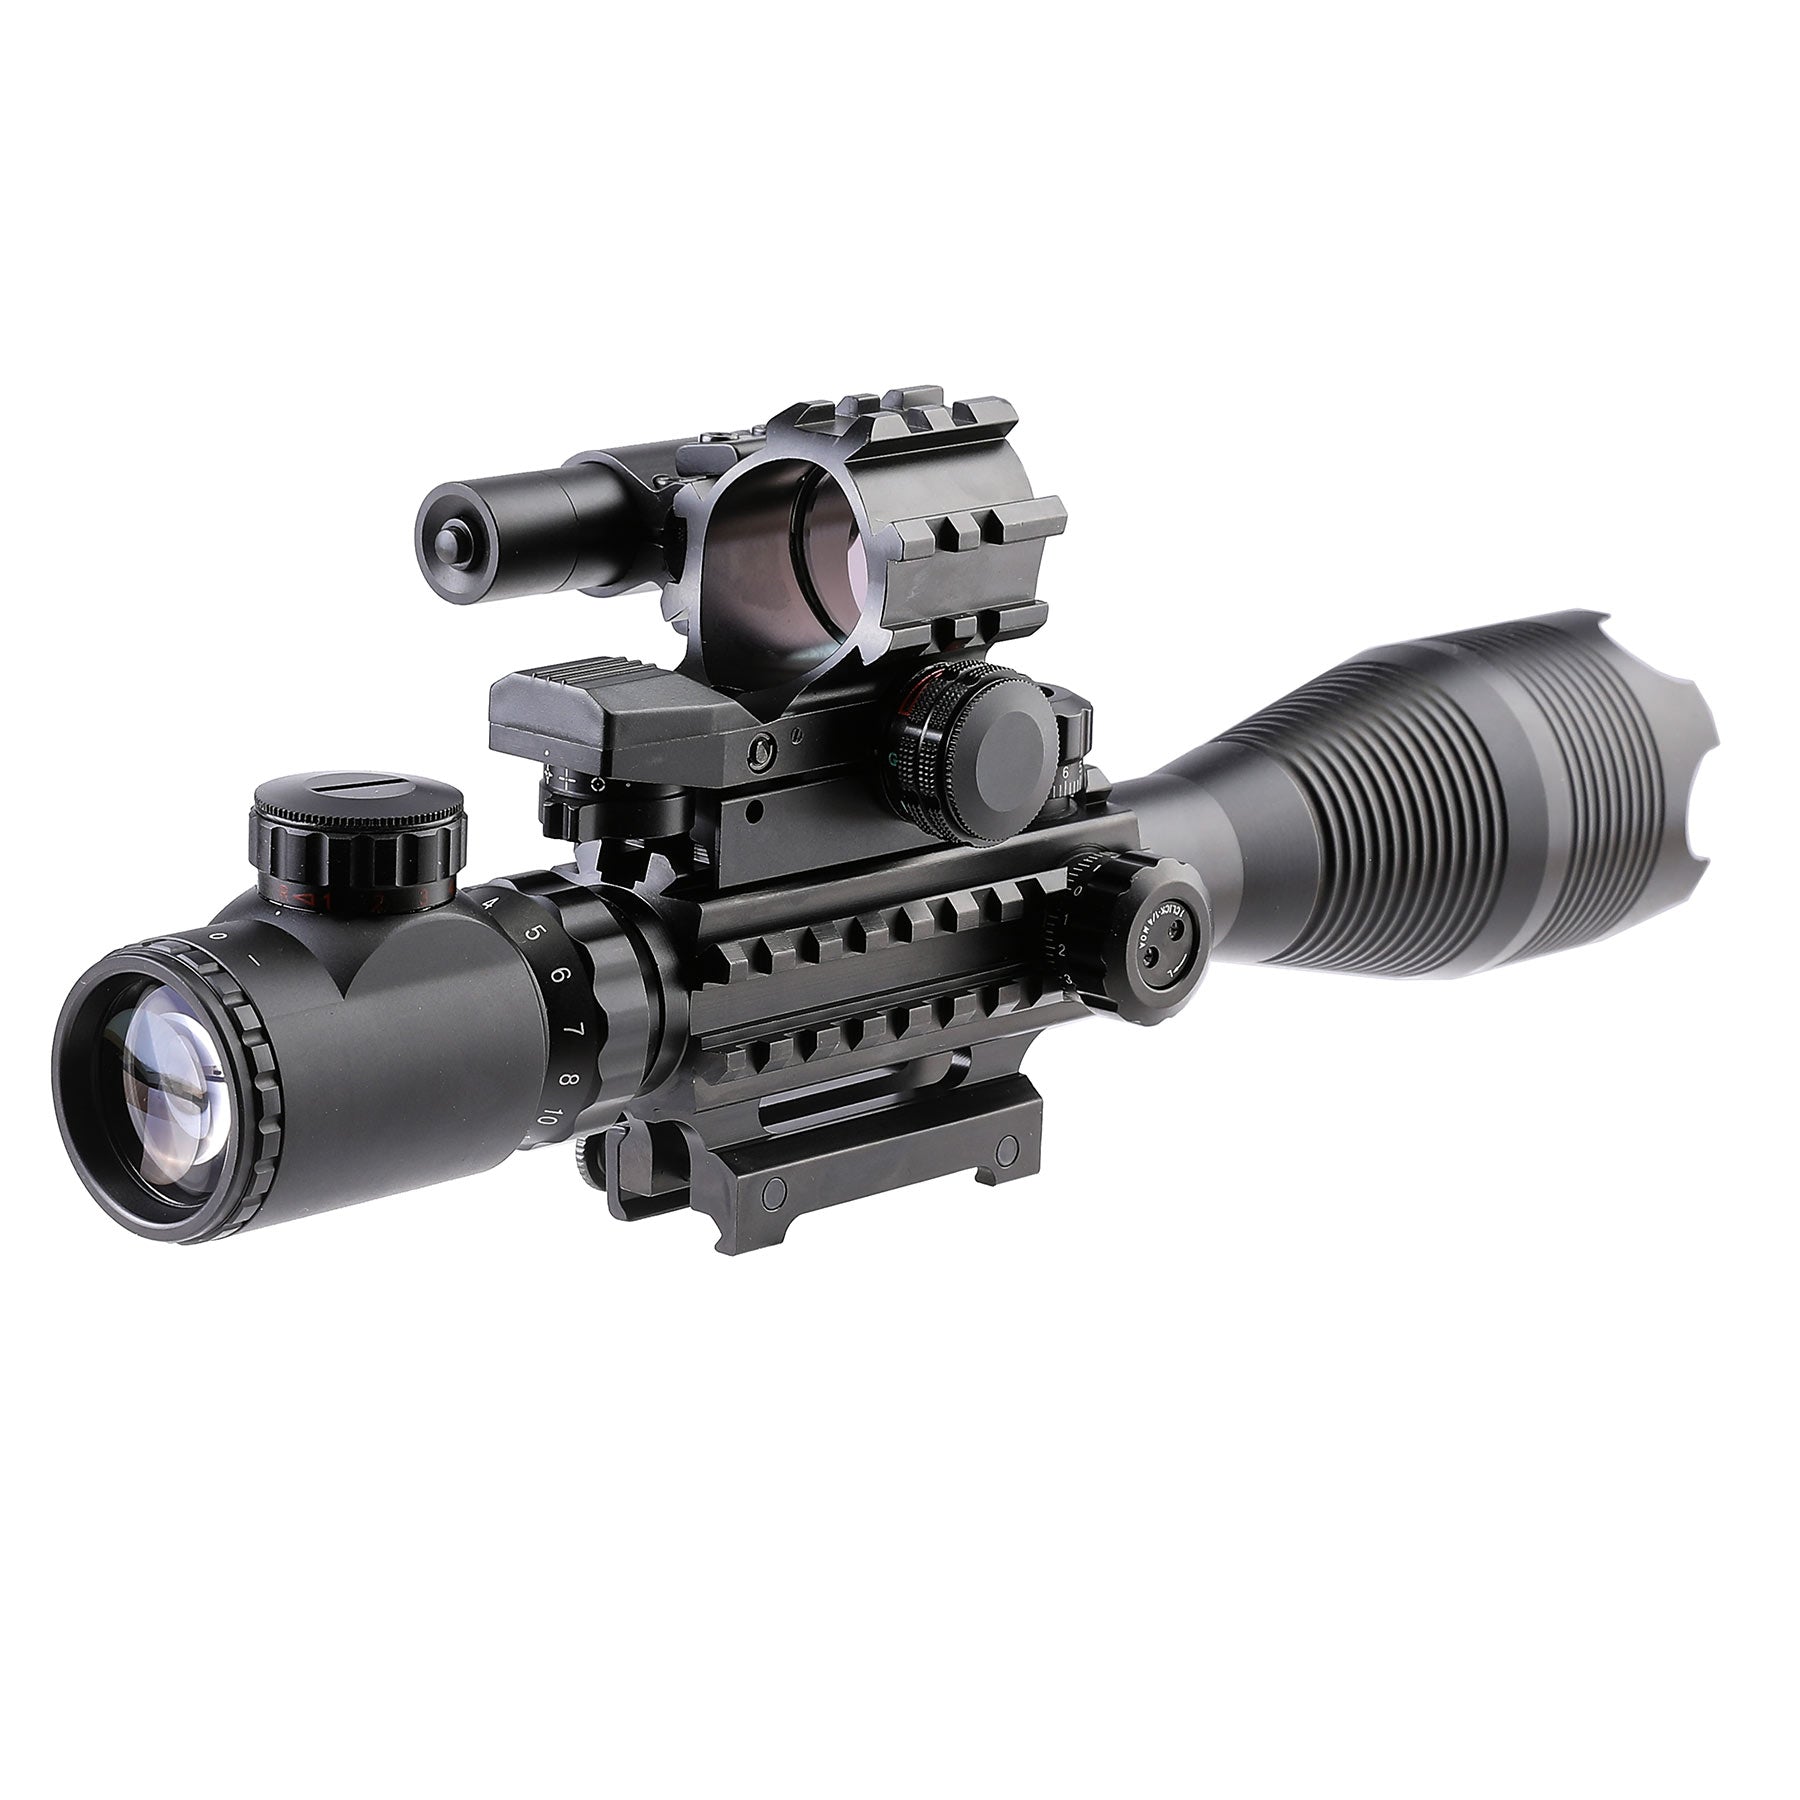 ar15m4 accessories; primary arms; aimpoint; ruger 10/22 accessories; ar scope; thermal scopes for rifles; reflex sight; holosun red dot; ar accessories; 